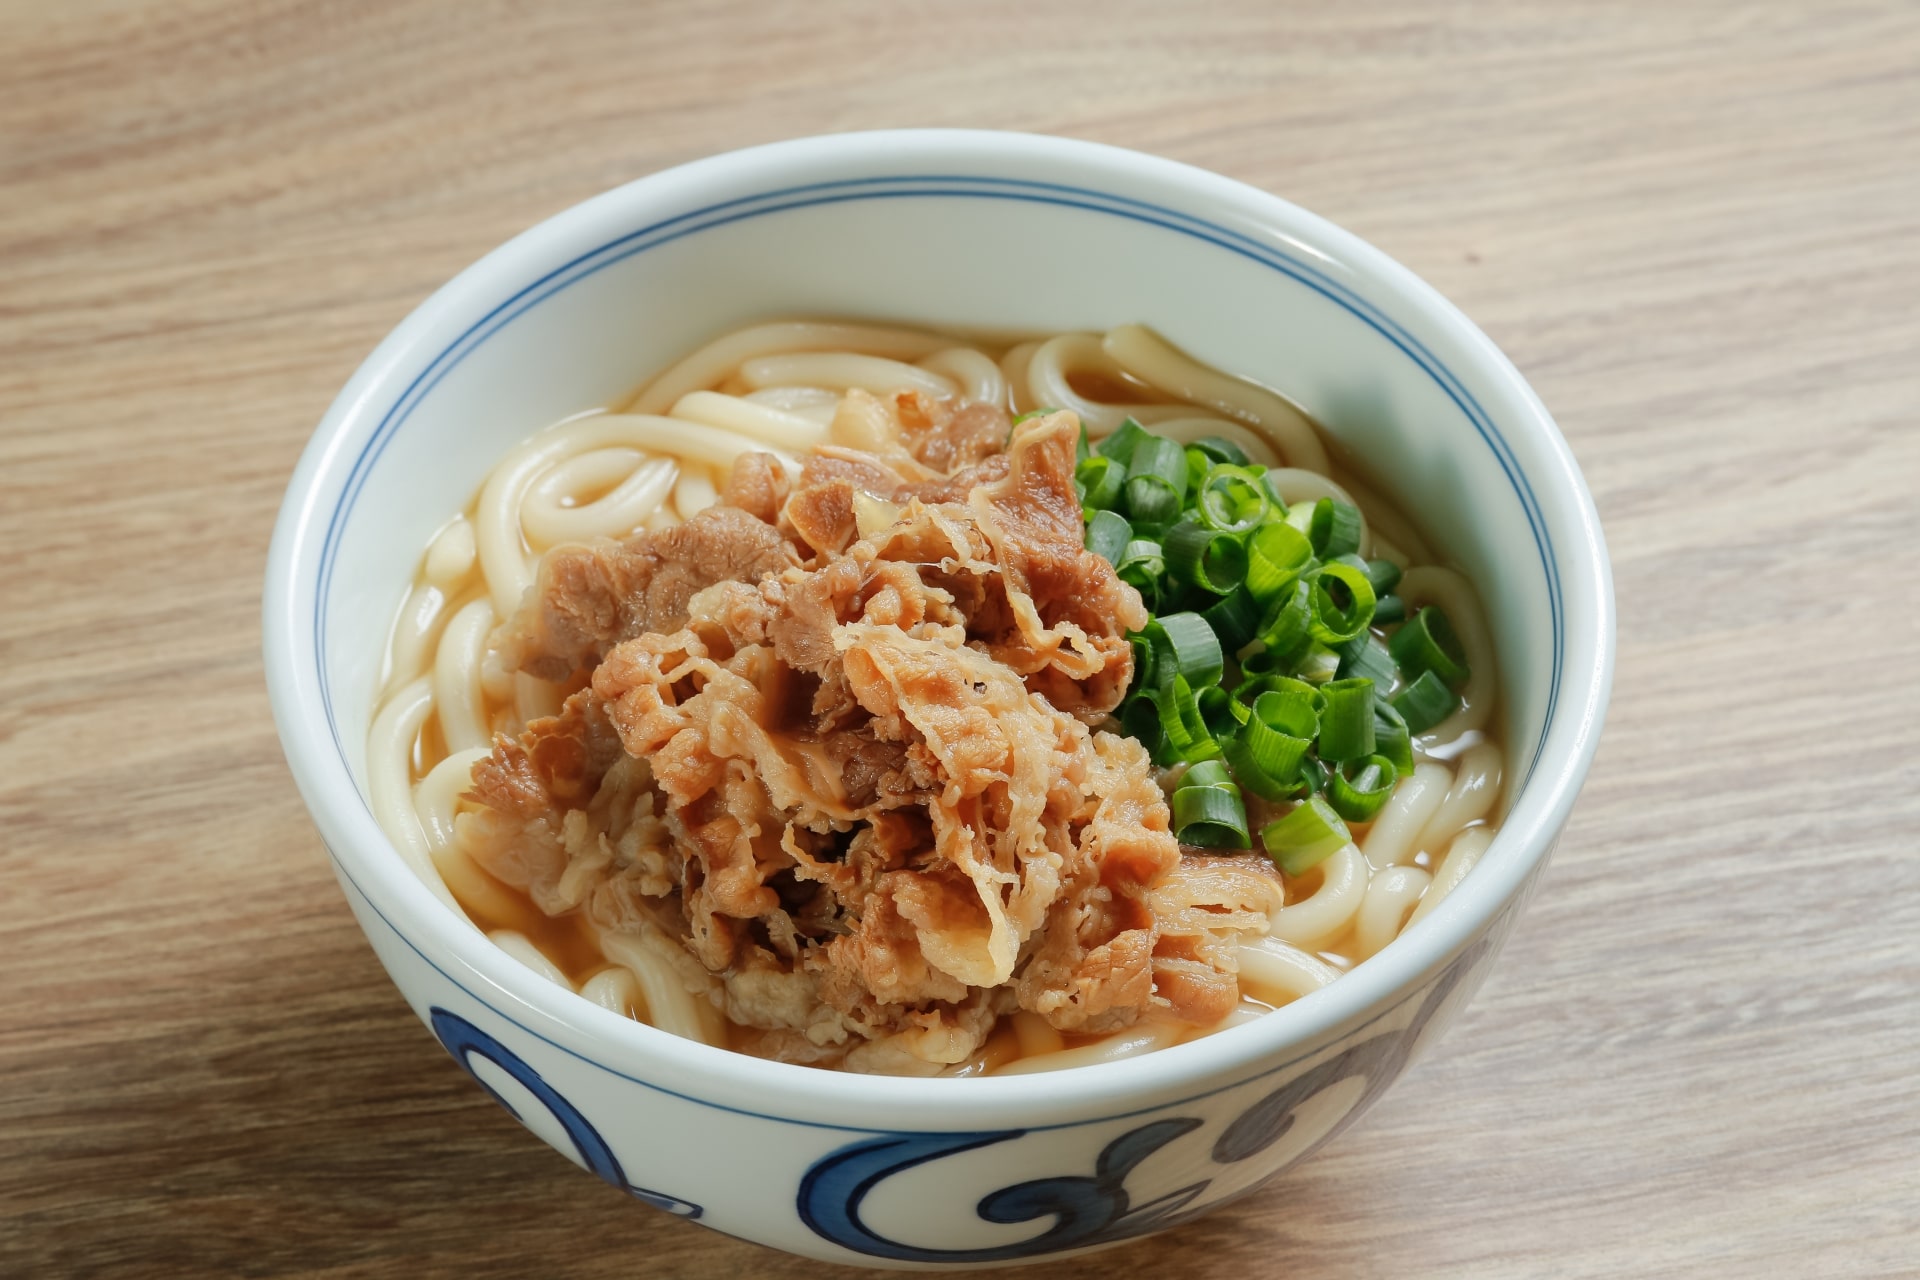 udon plate